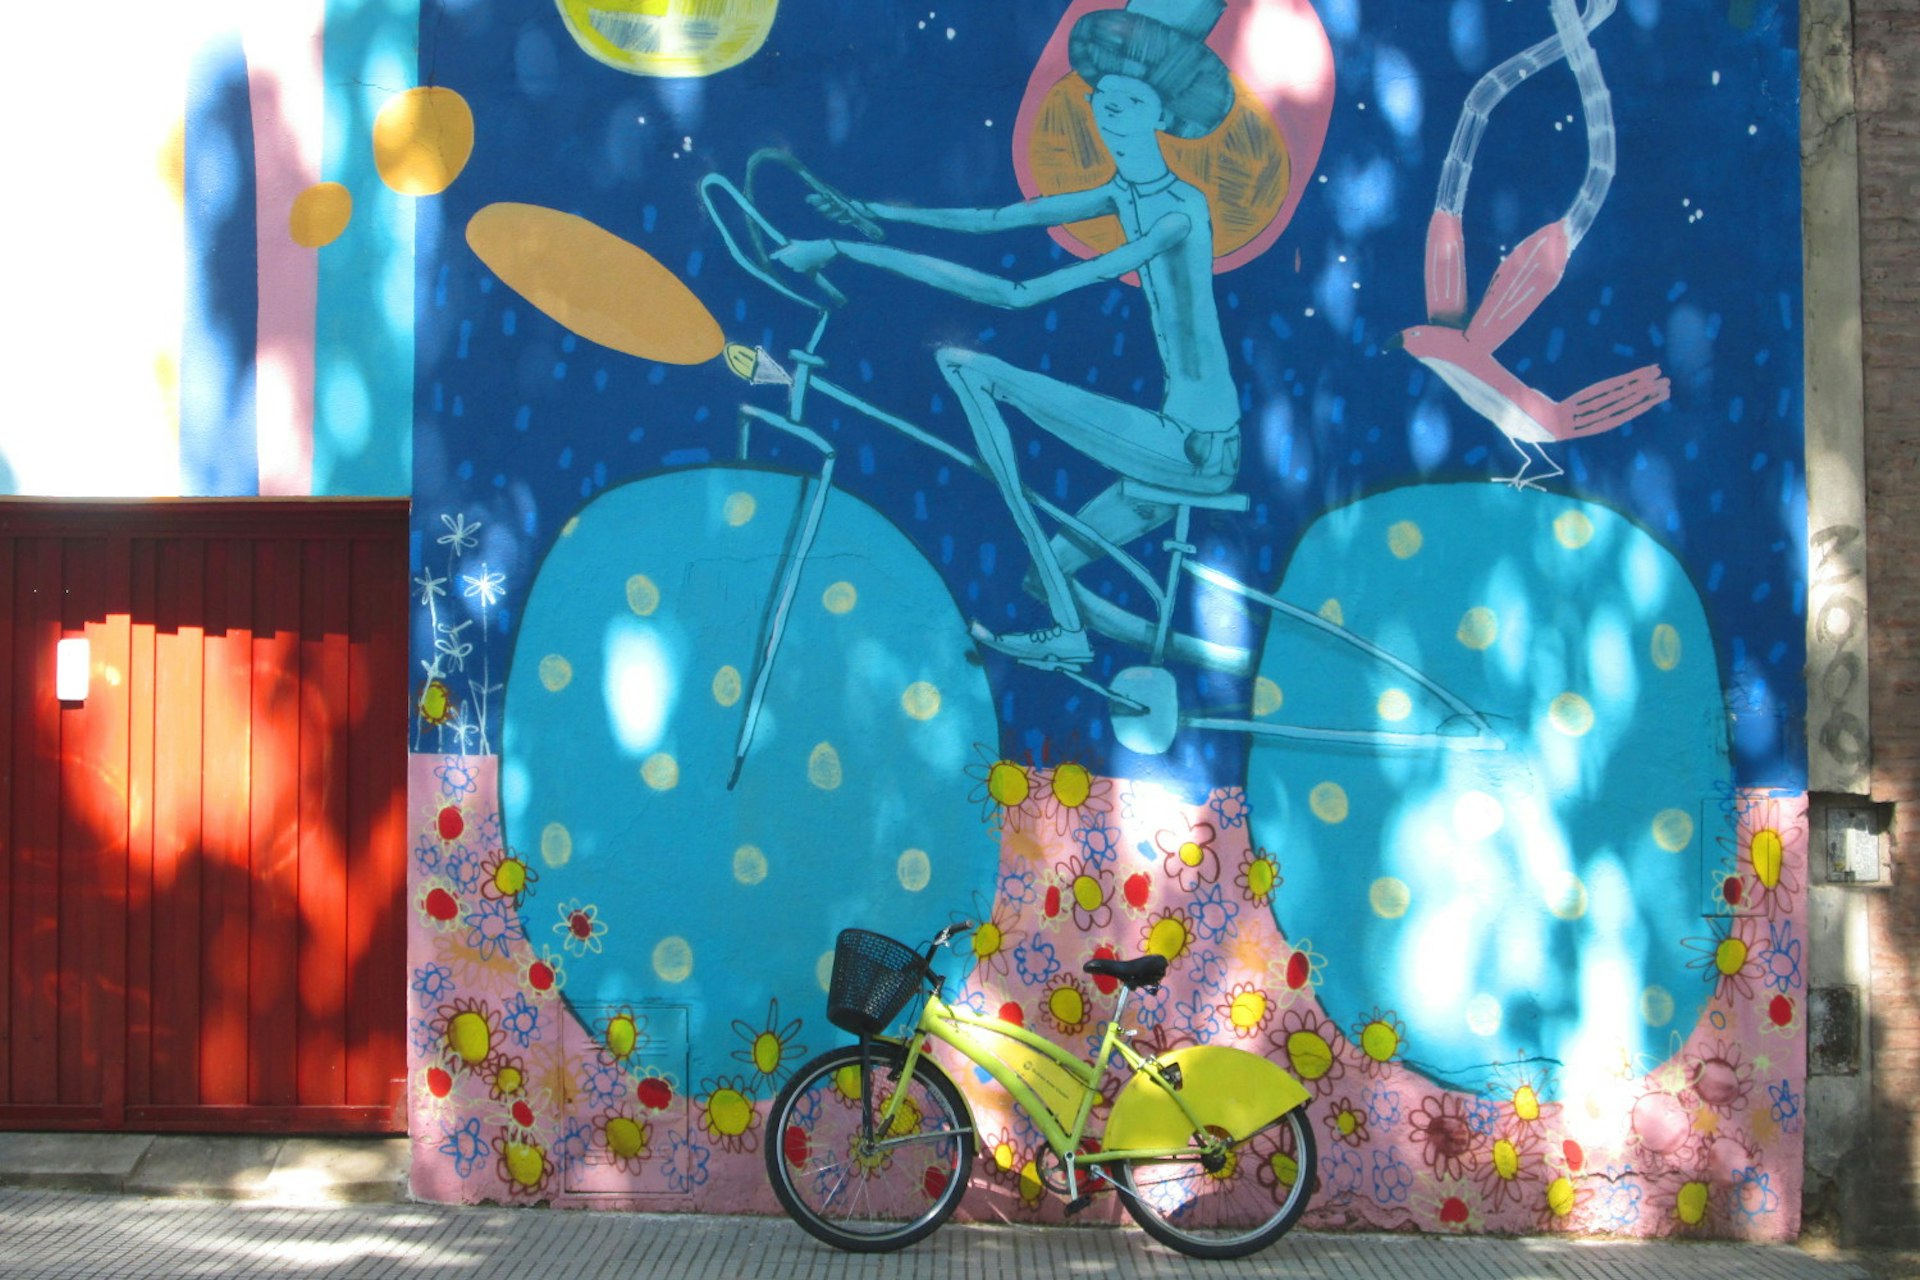 EcoBici: Buenos Aires' city bike sharing scheme. Image by Isabel Albiston / Lonely Planet